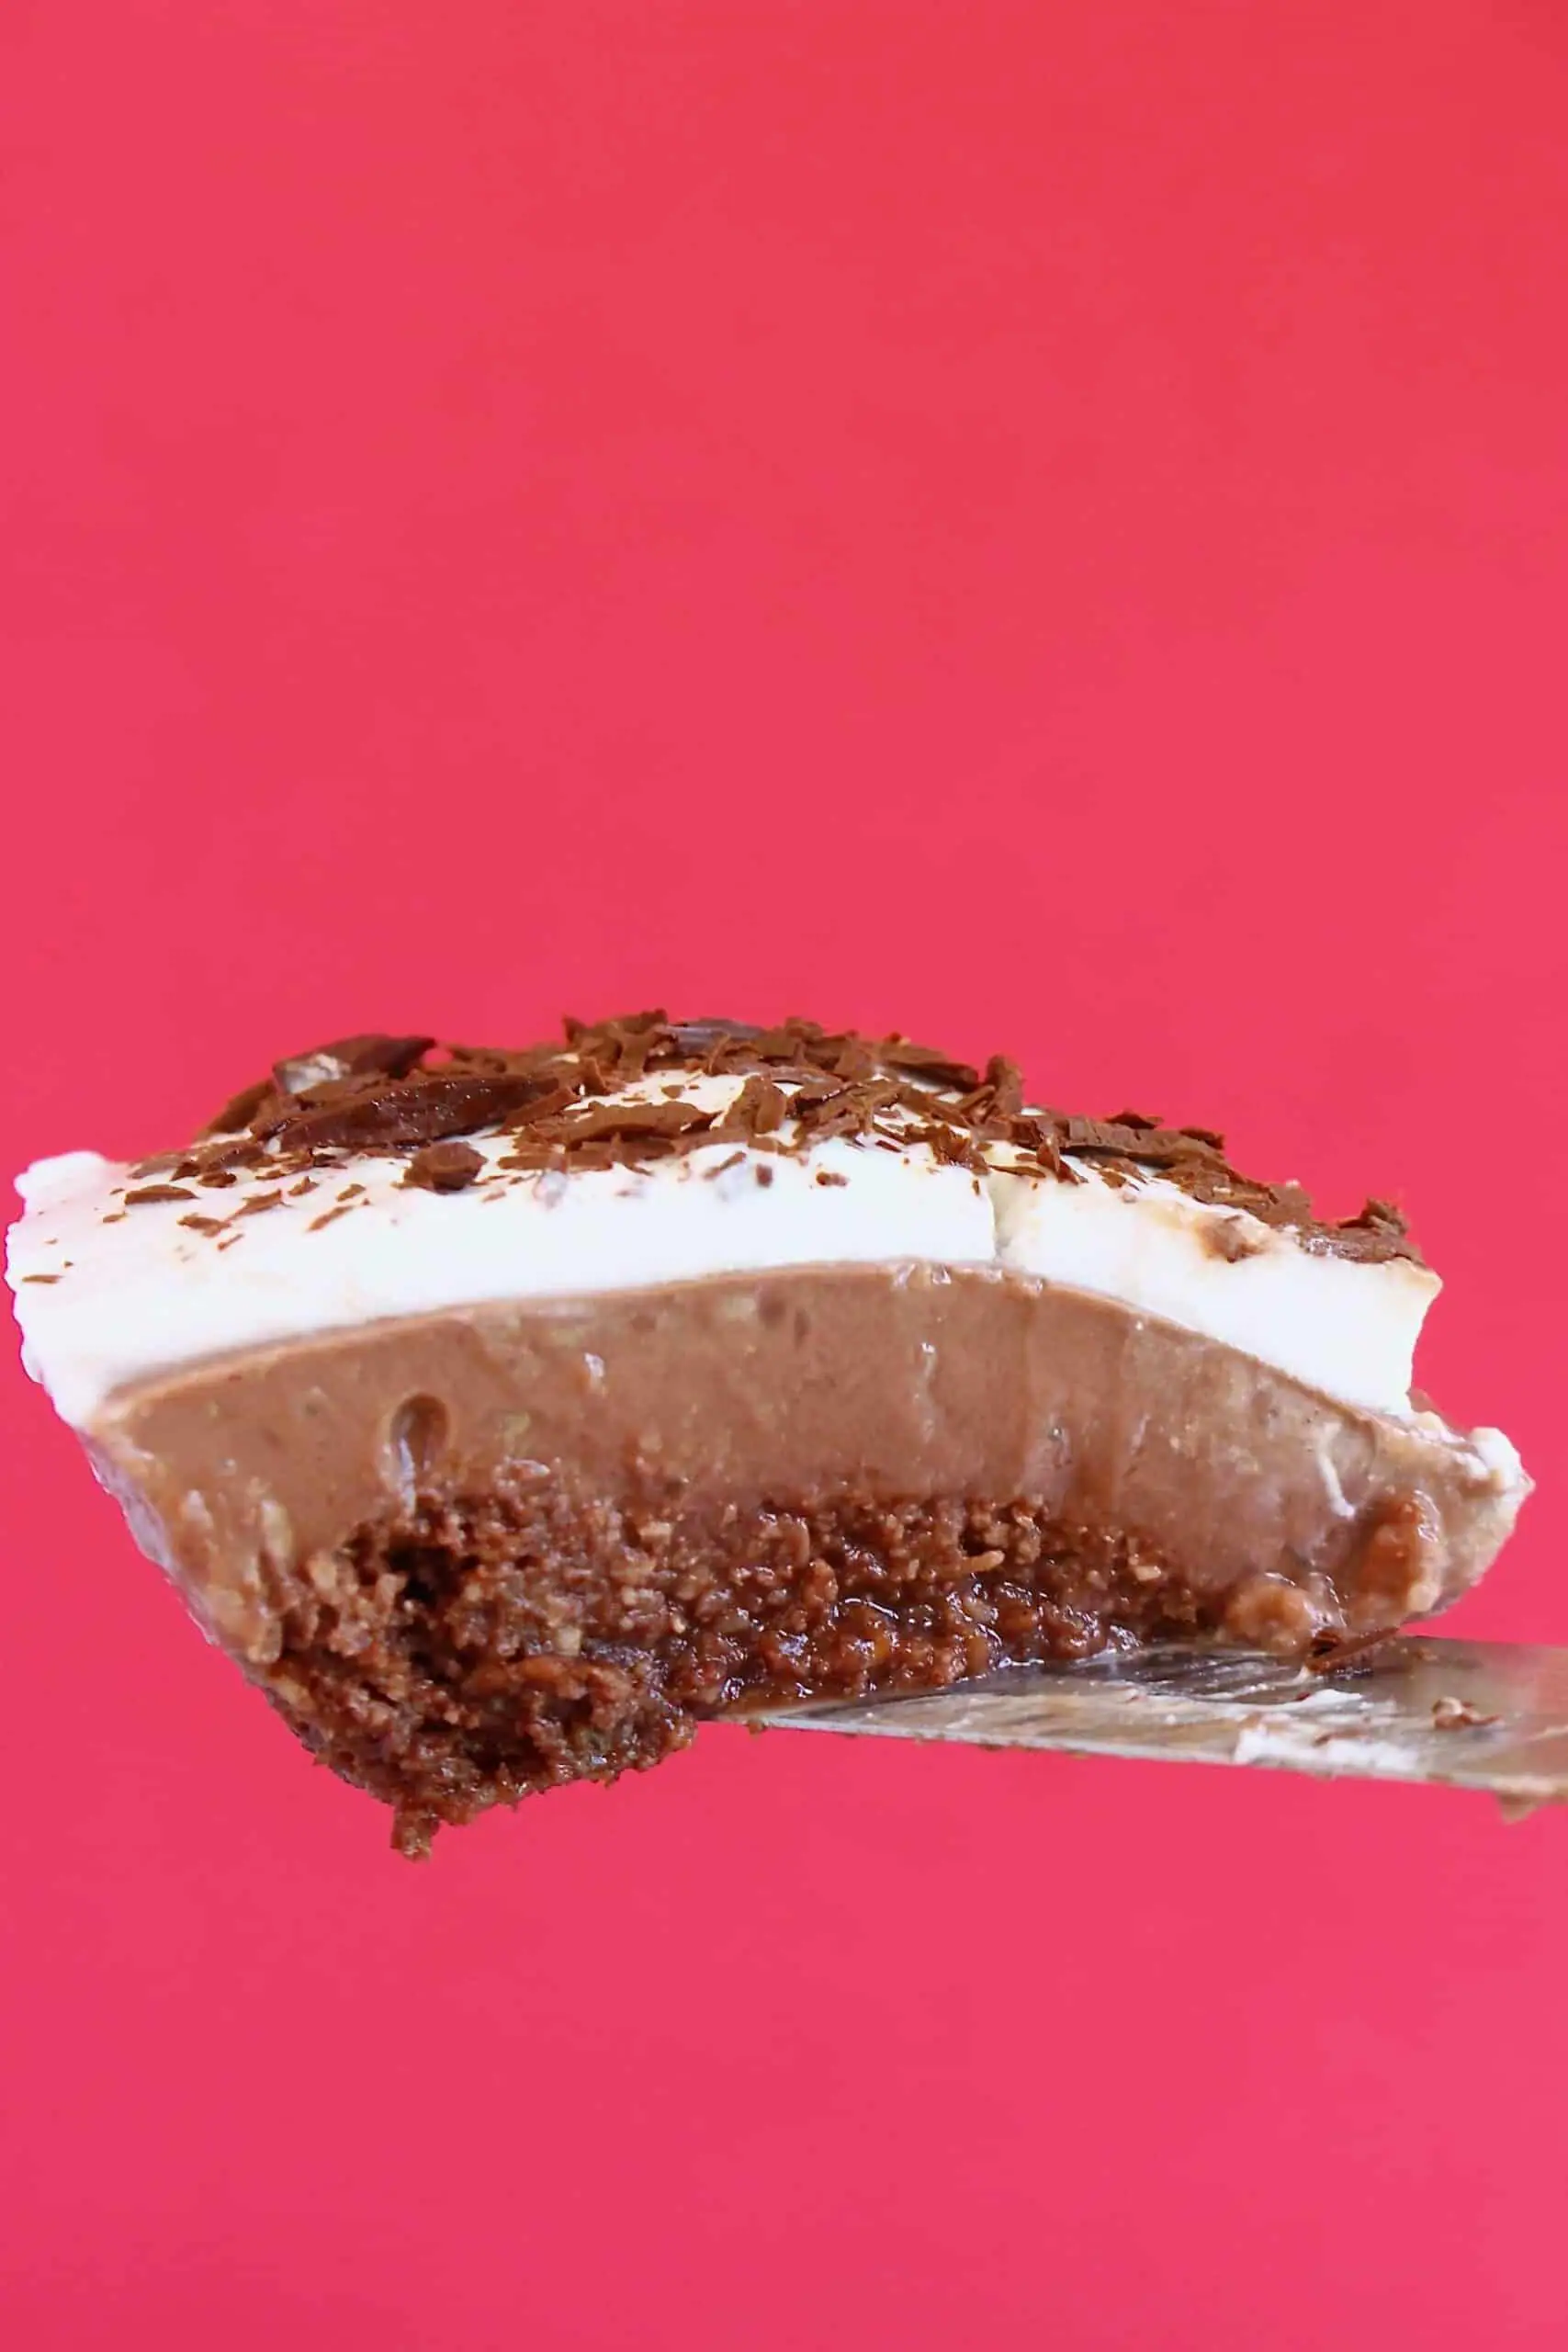 Photo of a slice of chocolate pie topped with whipped cream and chocolate shavings being held up against a bright pink background